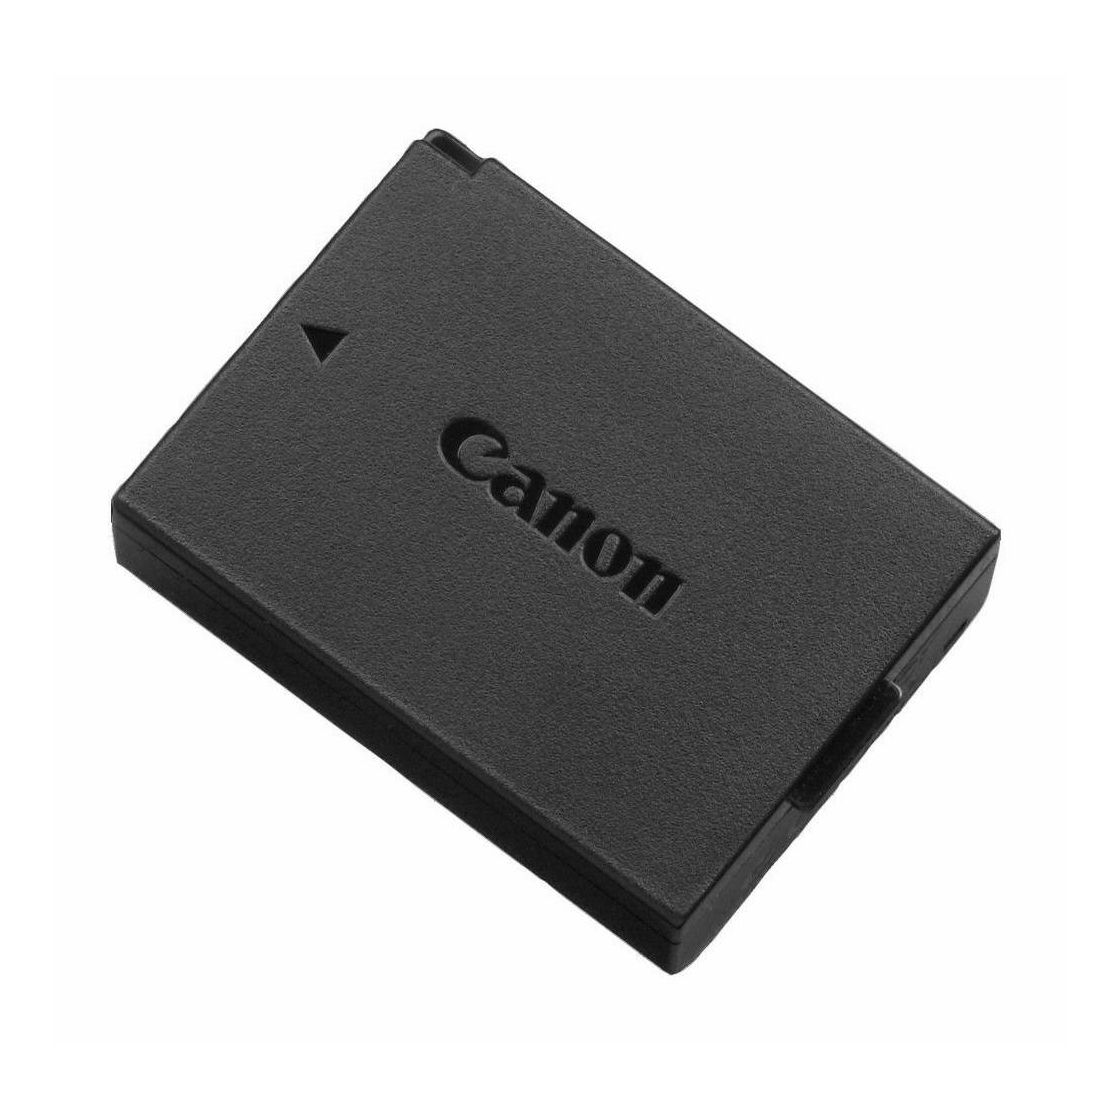 Canon LP-E10 860mAh 7.4V baterija za EOS 1300D 1200D 1100D Rebel T6 T5 T3 Lithium-Ion Battery Pack (5108B002AA)